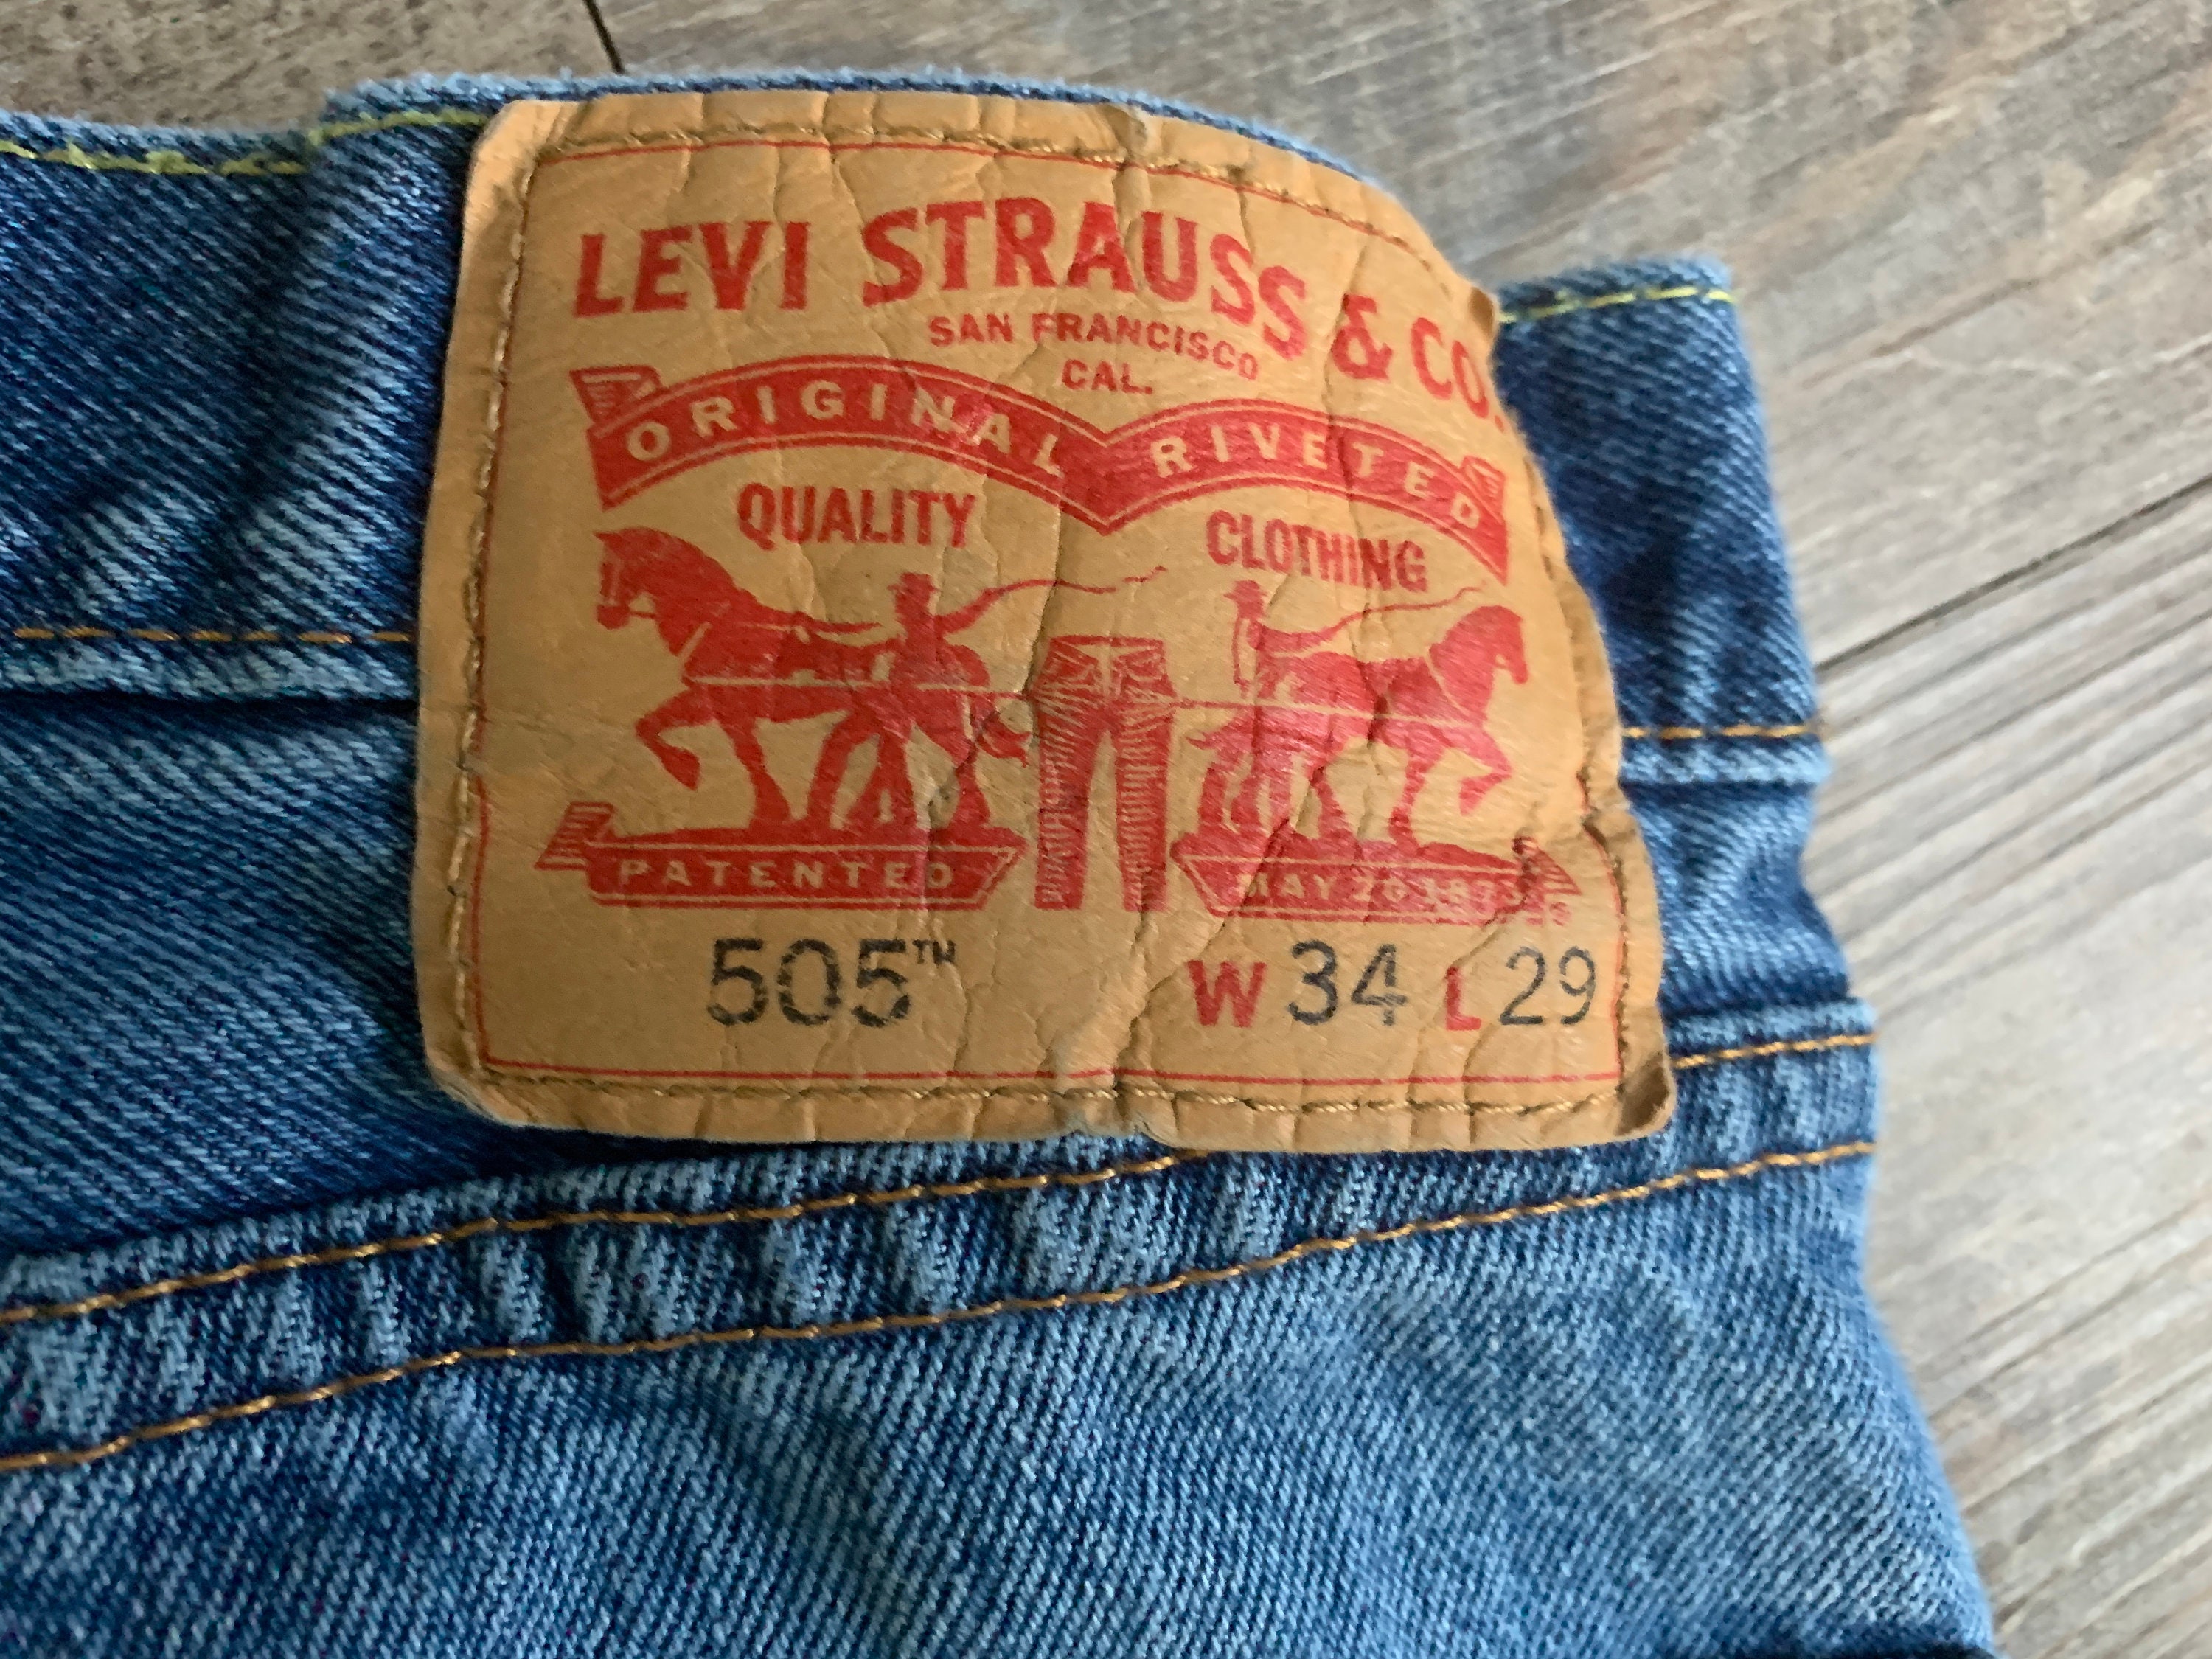 Mens Levis Strauss Original Riveted Jeans Size 31/34